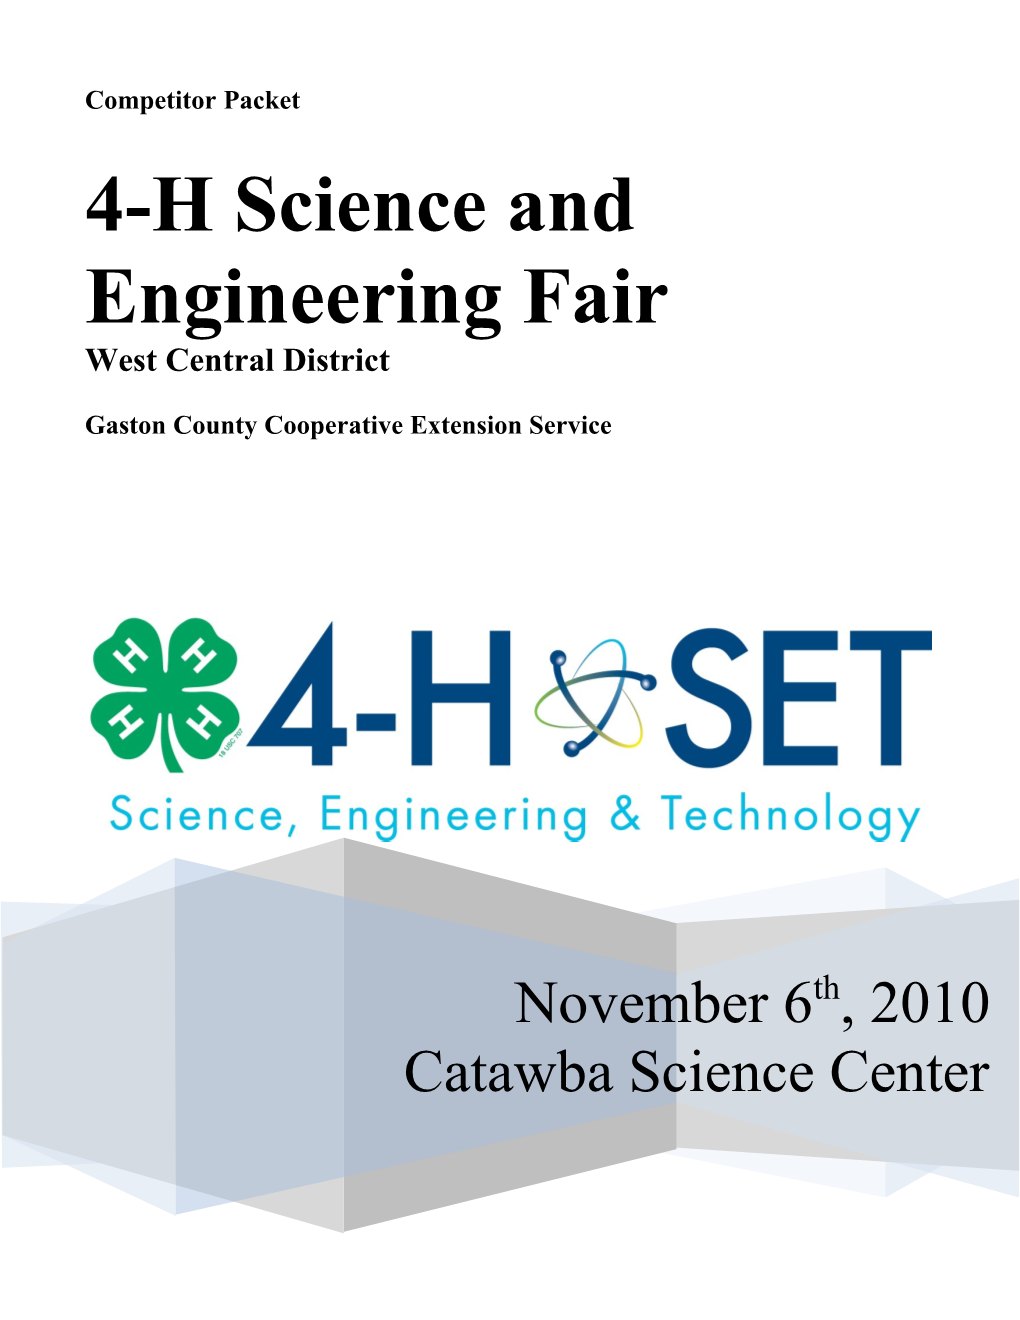 4-H Science and Engineering Fair